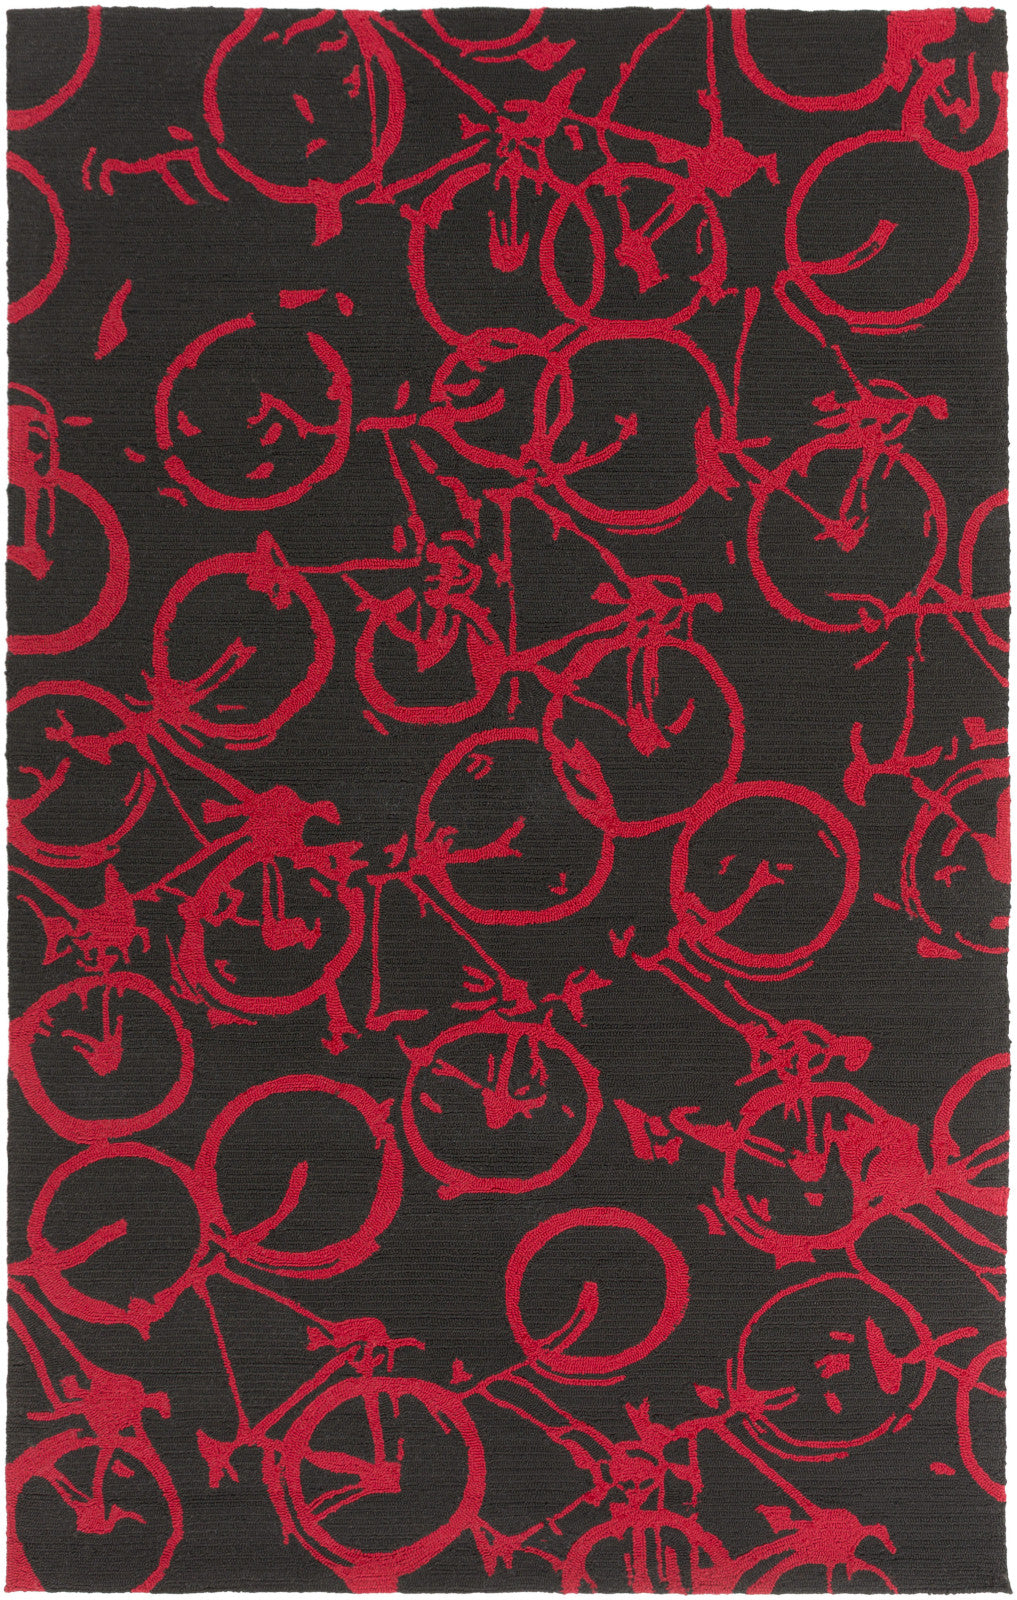 Surya Pandemonium PDM-1003 Area Rug by Mike Farrell